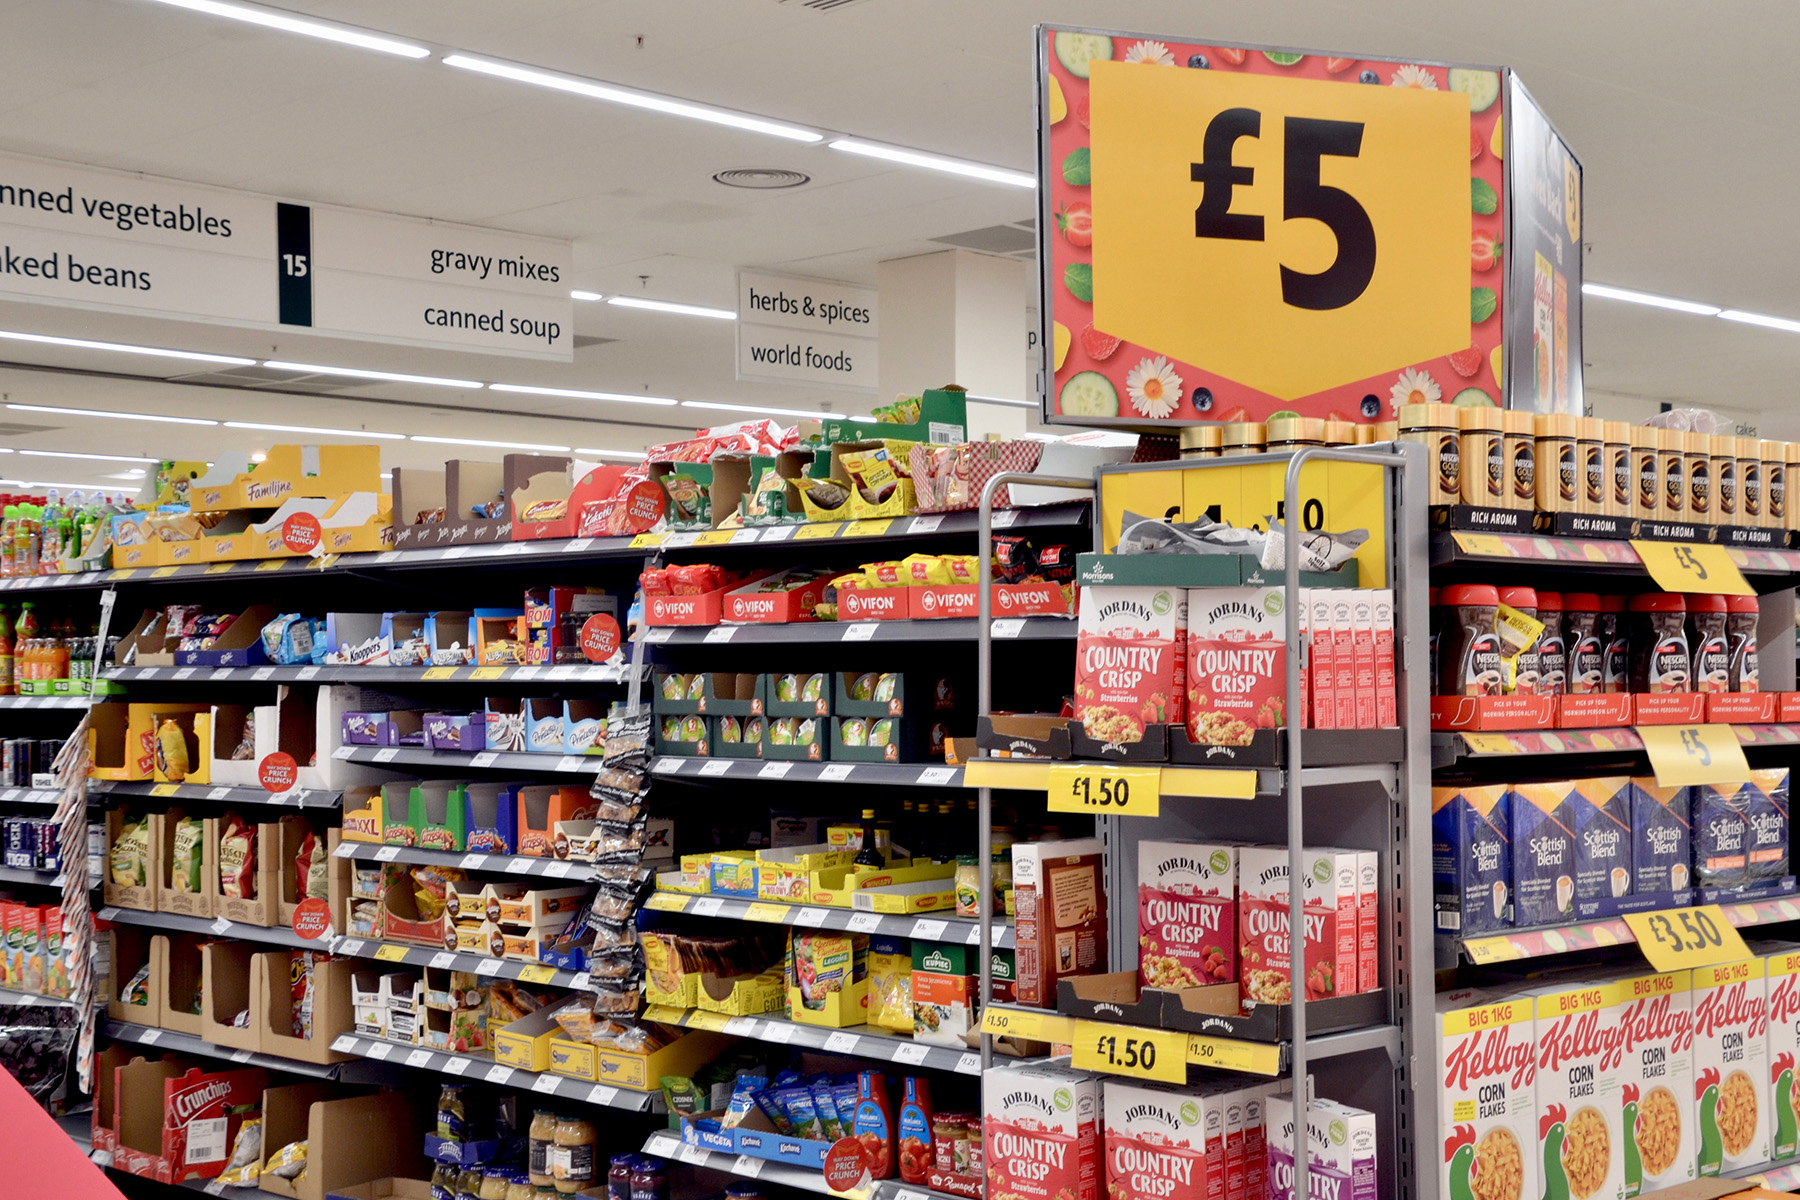 Supermarkets and grocery stores in the UK